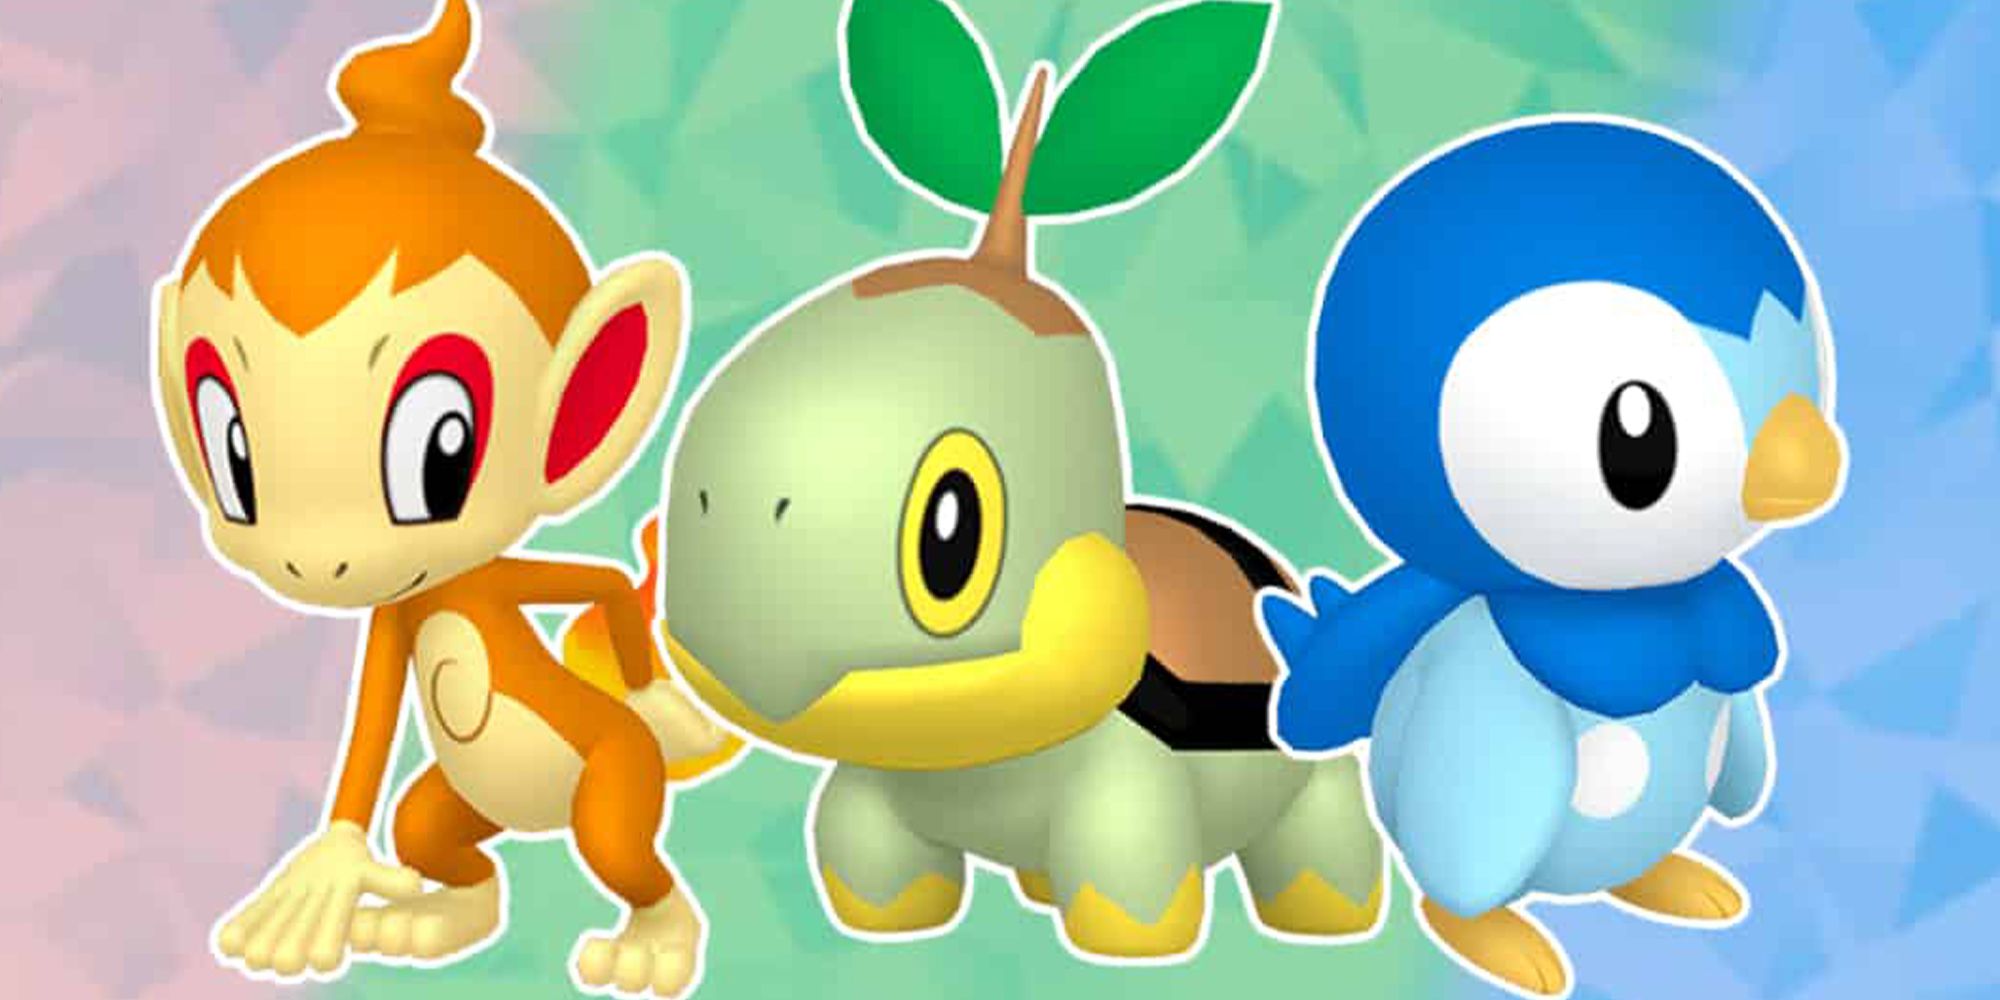 Chimchar, Turtwig, and Piplup in Pokémon BDSP